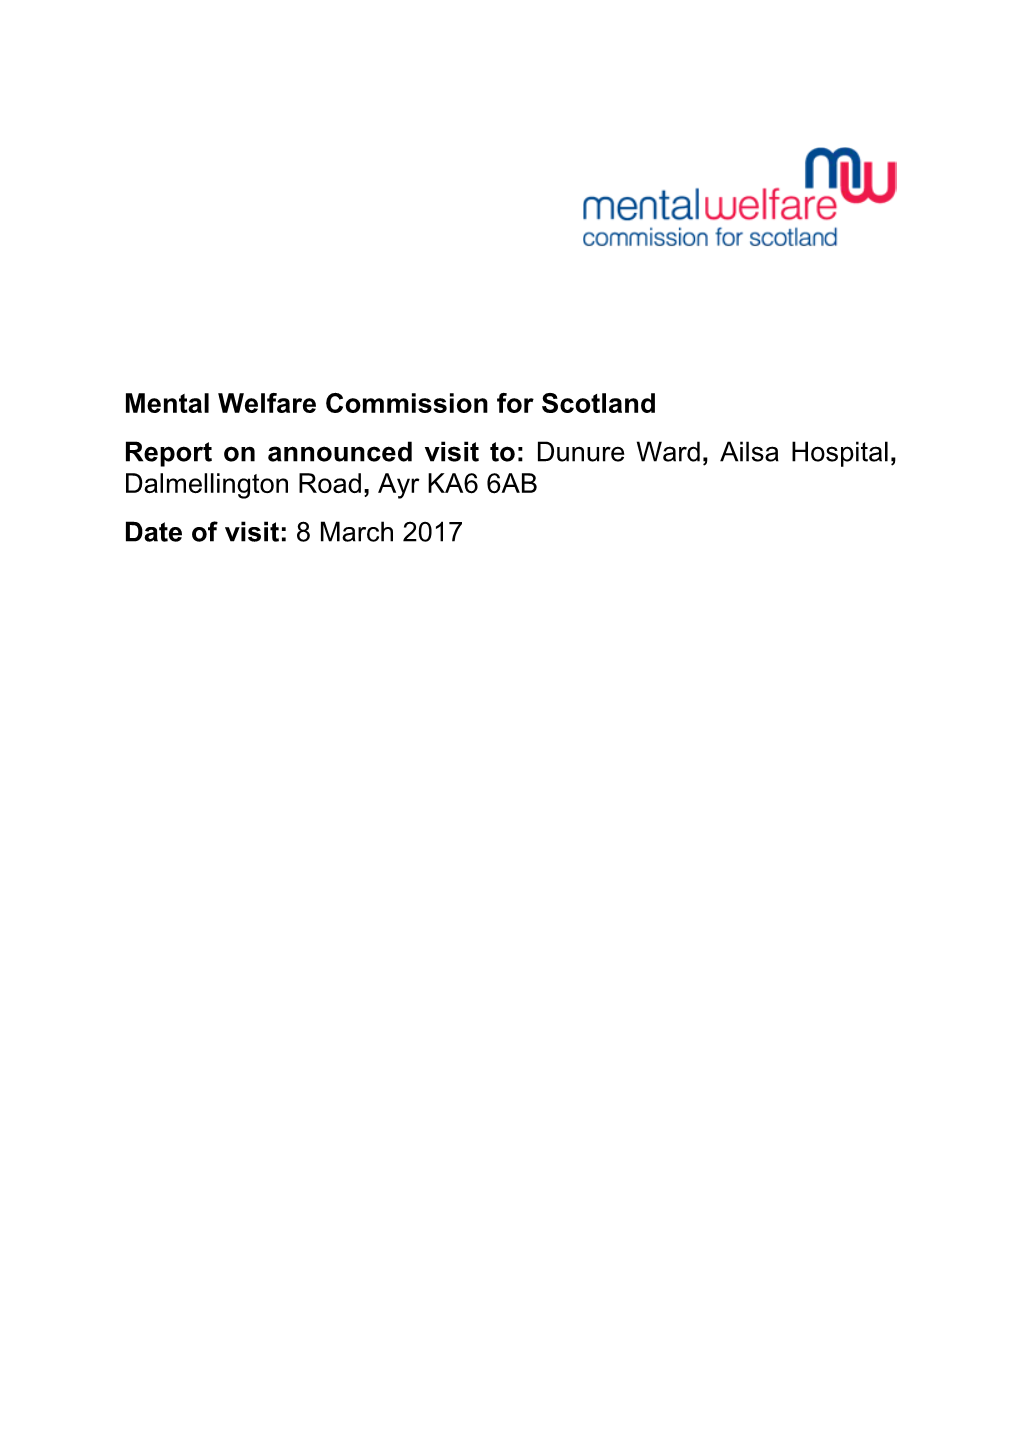 Mental Welfare Commission for Scotland Report on Announced Visit To: Dunure Ward, Ailsa Hospital, Dalmellington Road, Ayr KA6 6AB Date of Visit: 8 March 2017